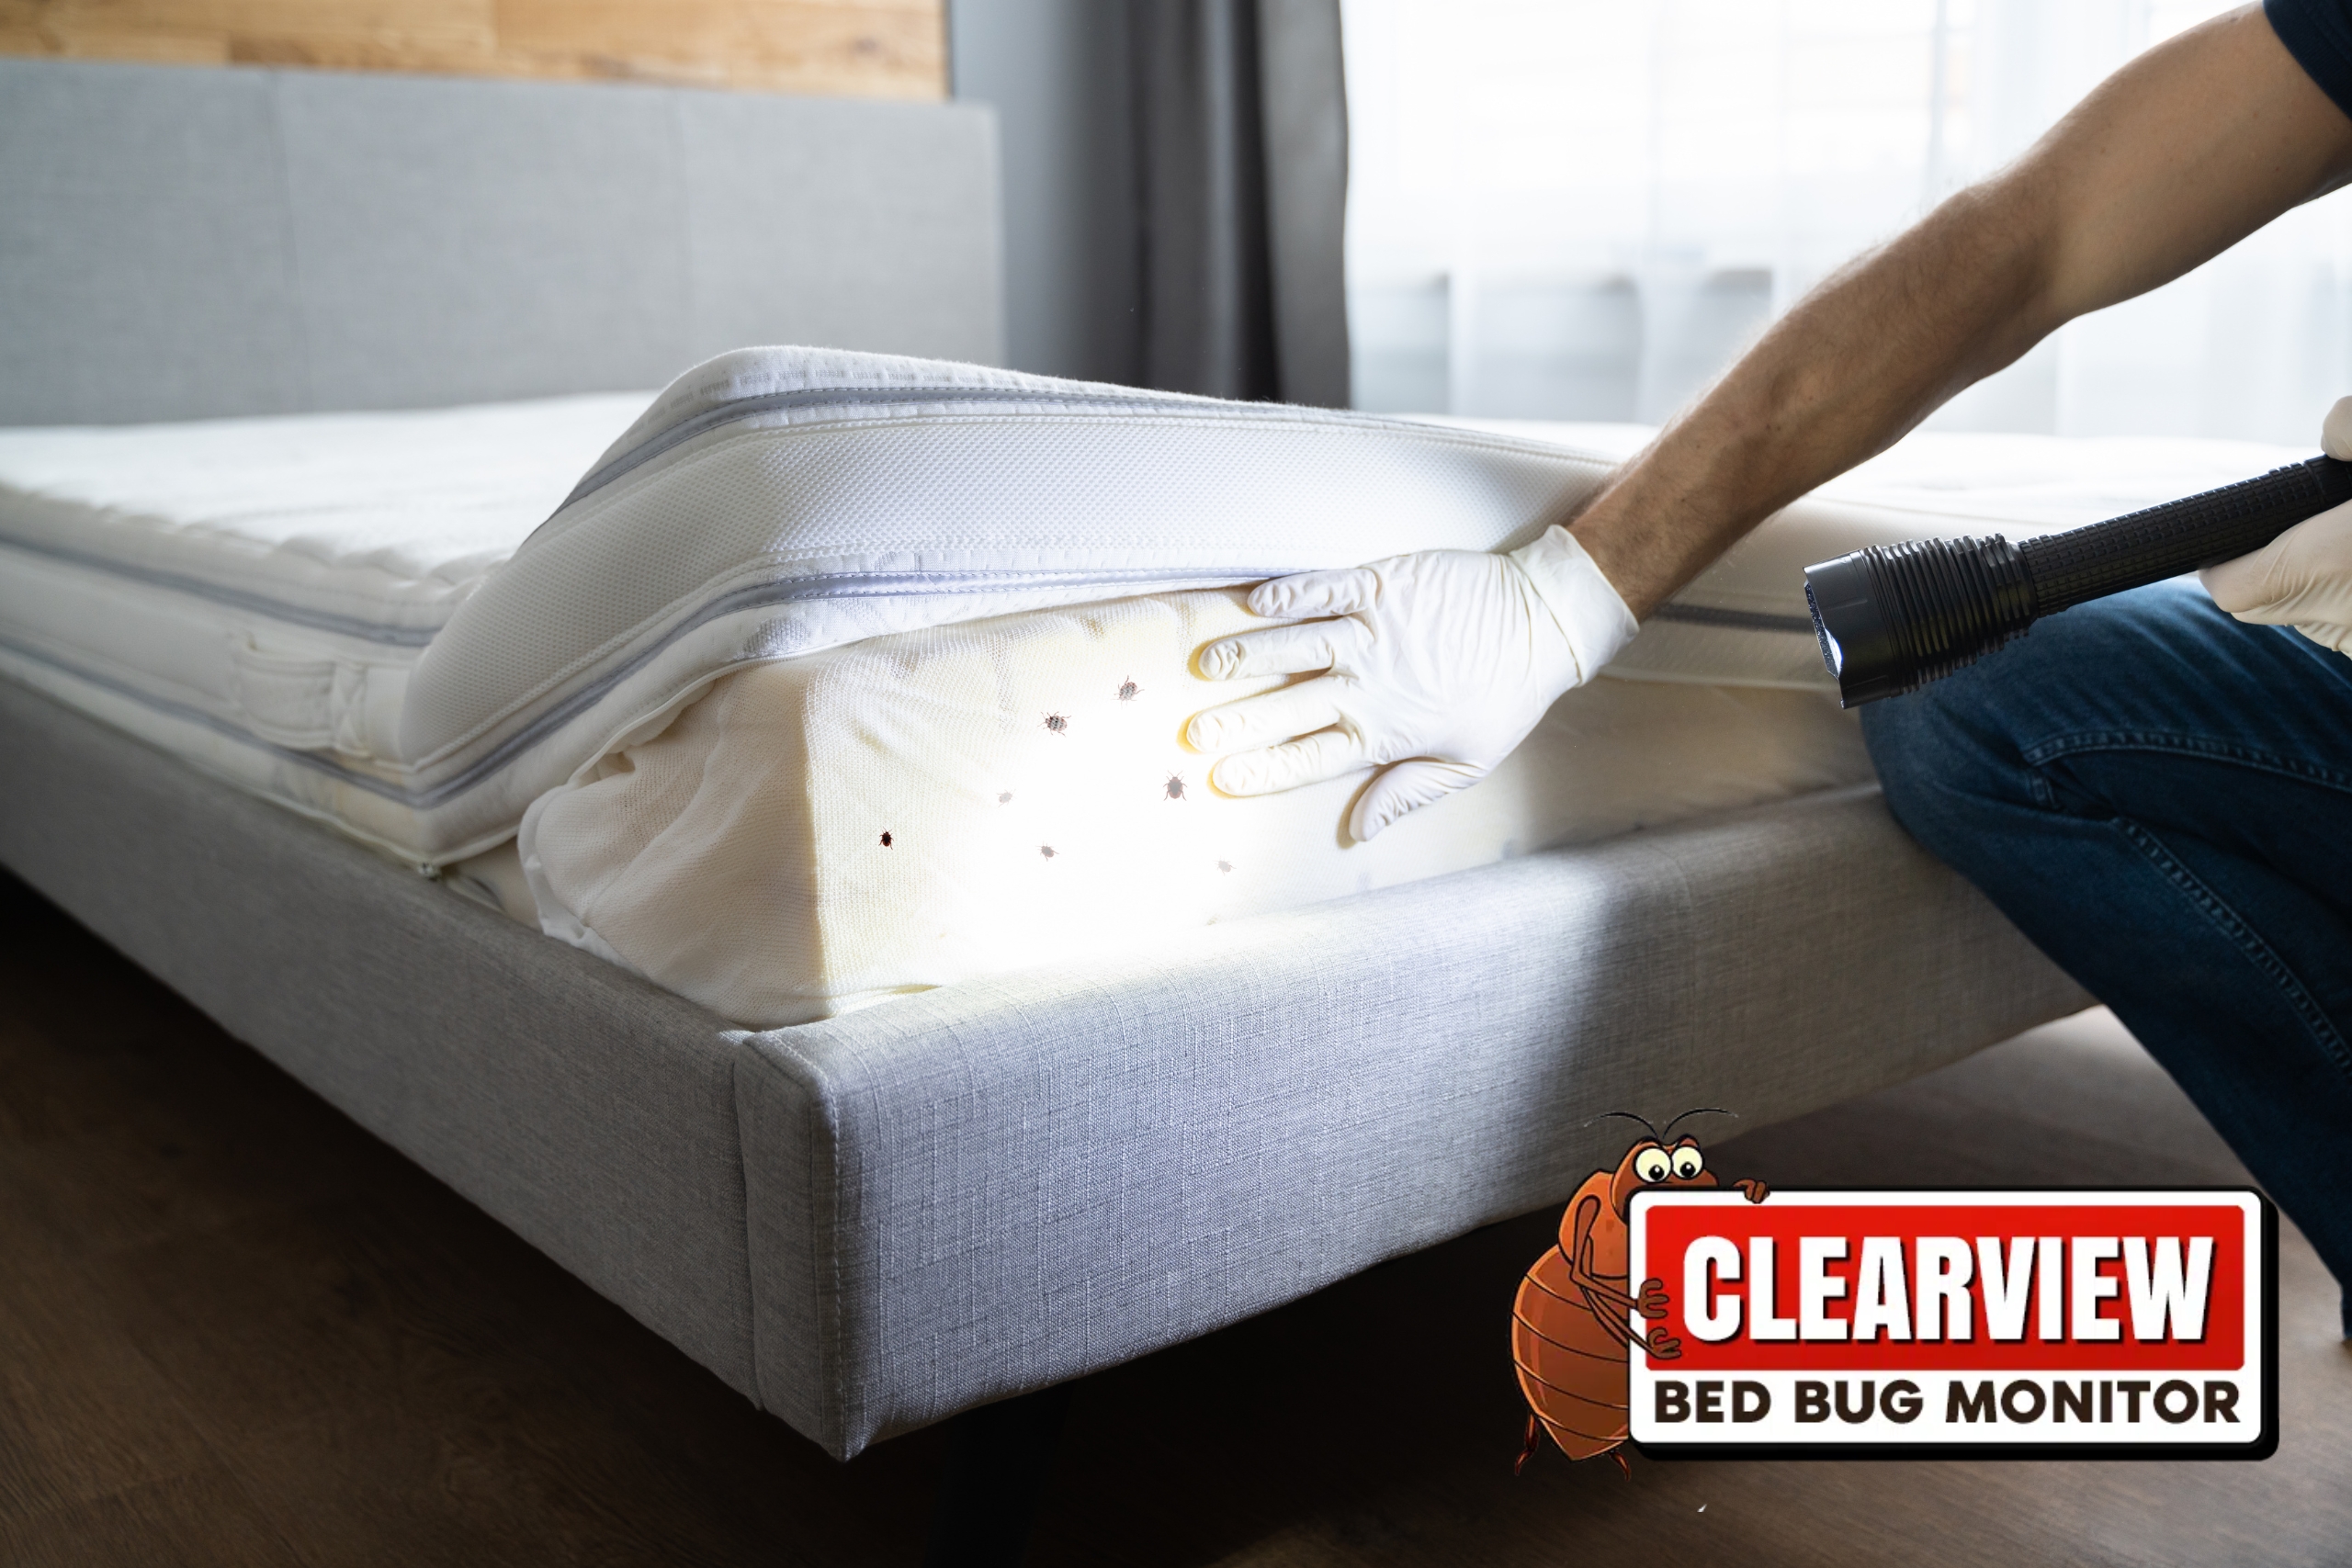 Exploring the Components of the Clearview Bed Bug Monitor